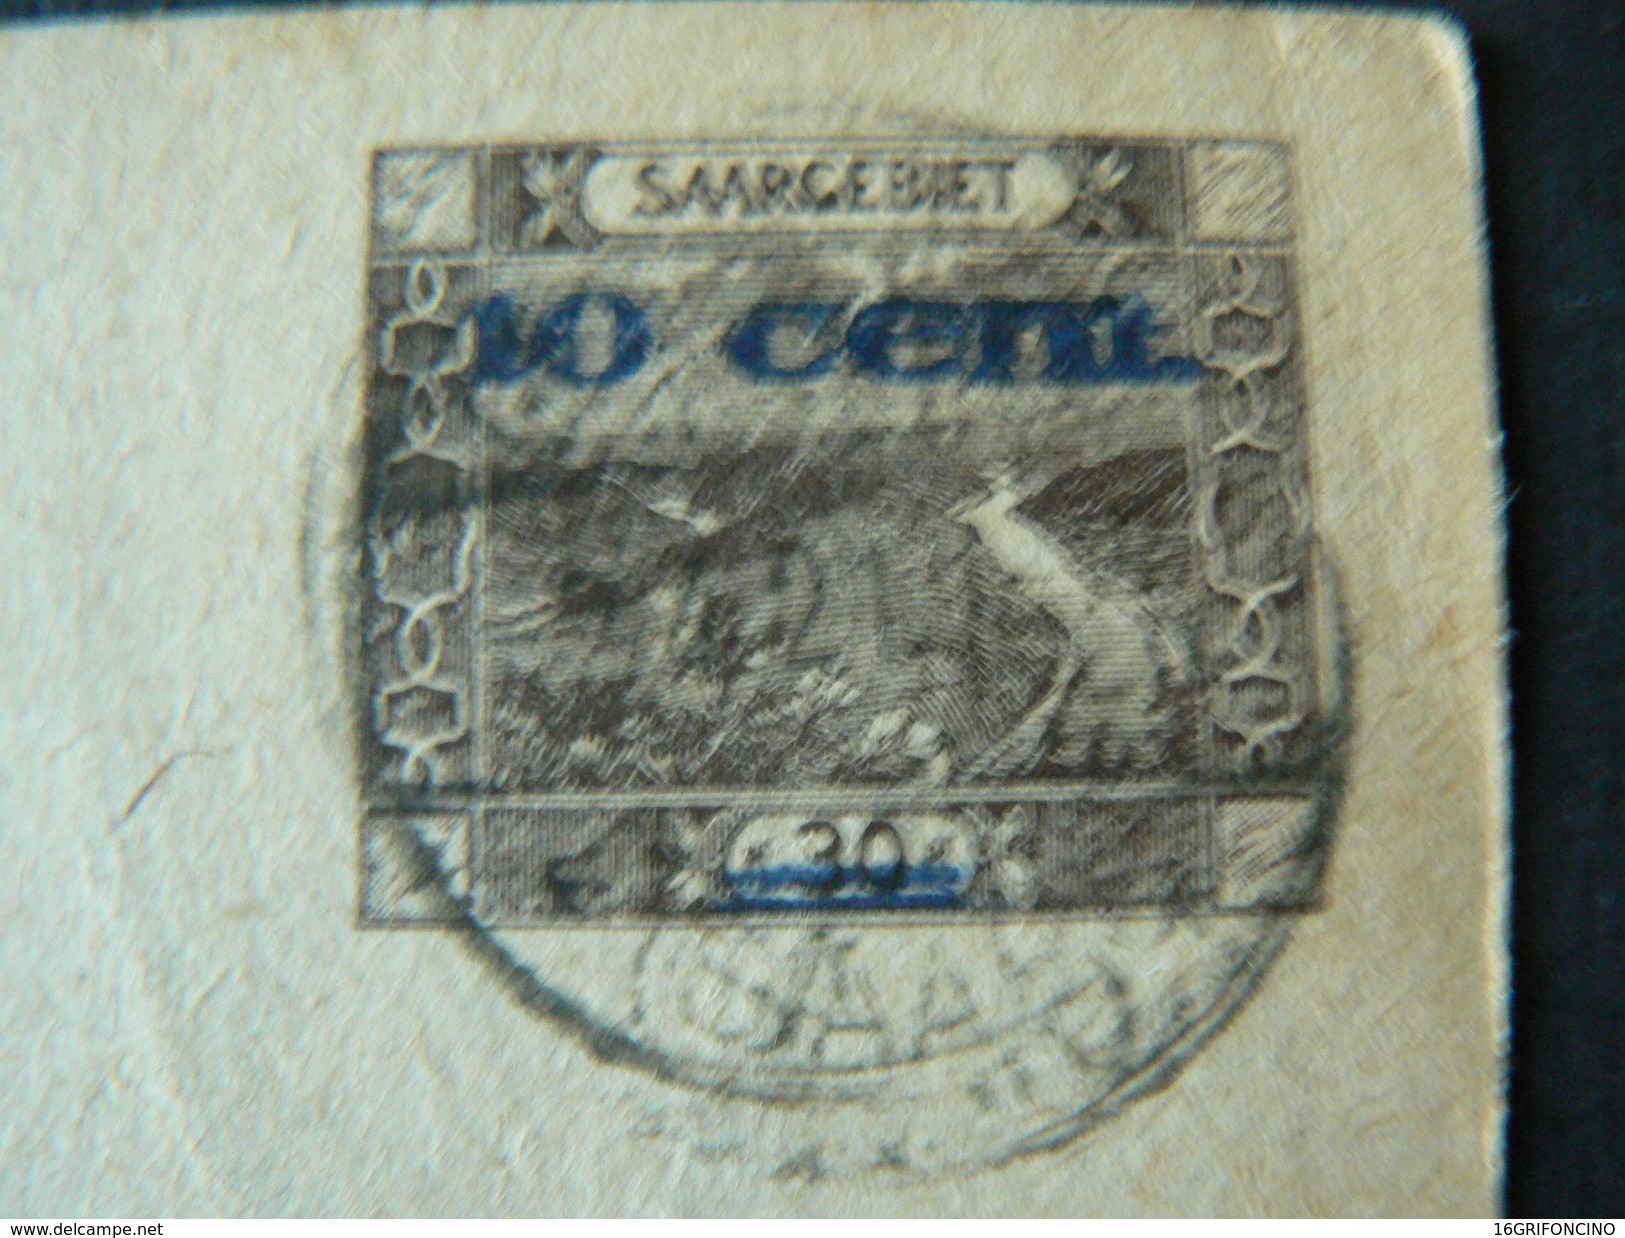 3 ANCIENT POSTKARTE OF GERMANY WITH STAMP...ONLY ONE USED...VERY NICE..//.ANTICHE CARTE POSTALI.TIMBRATE.